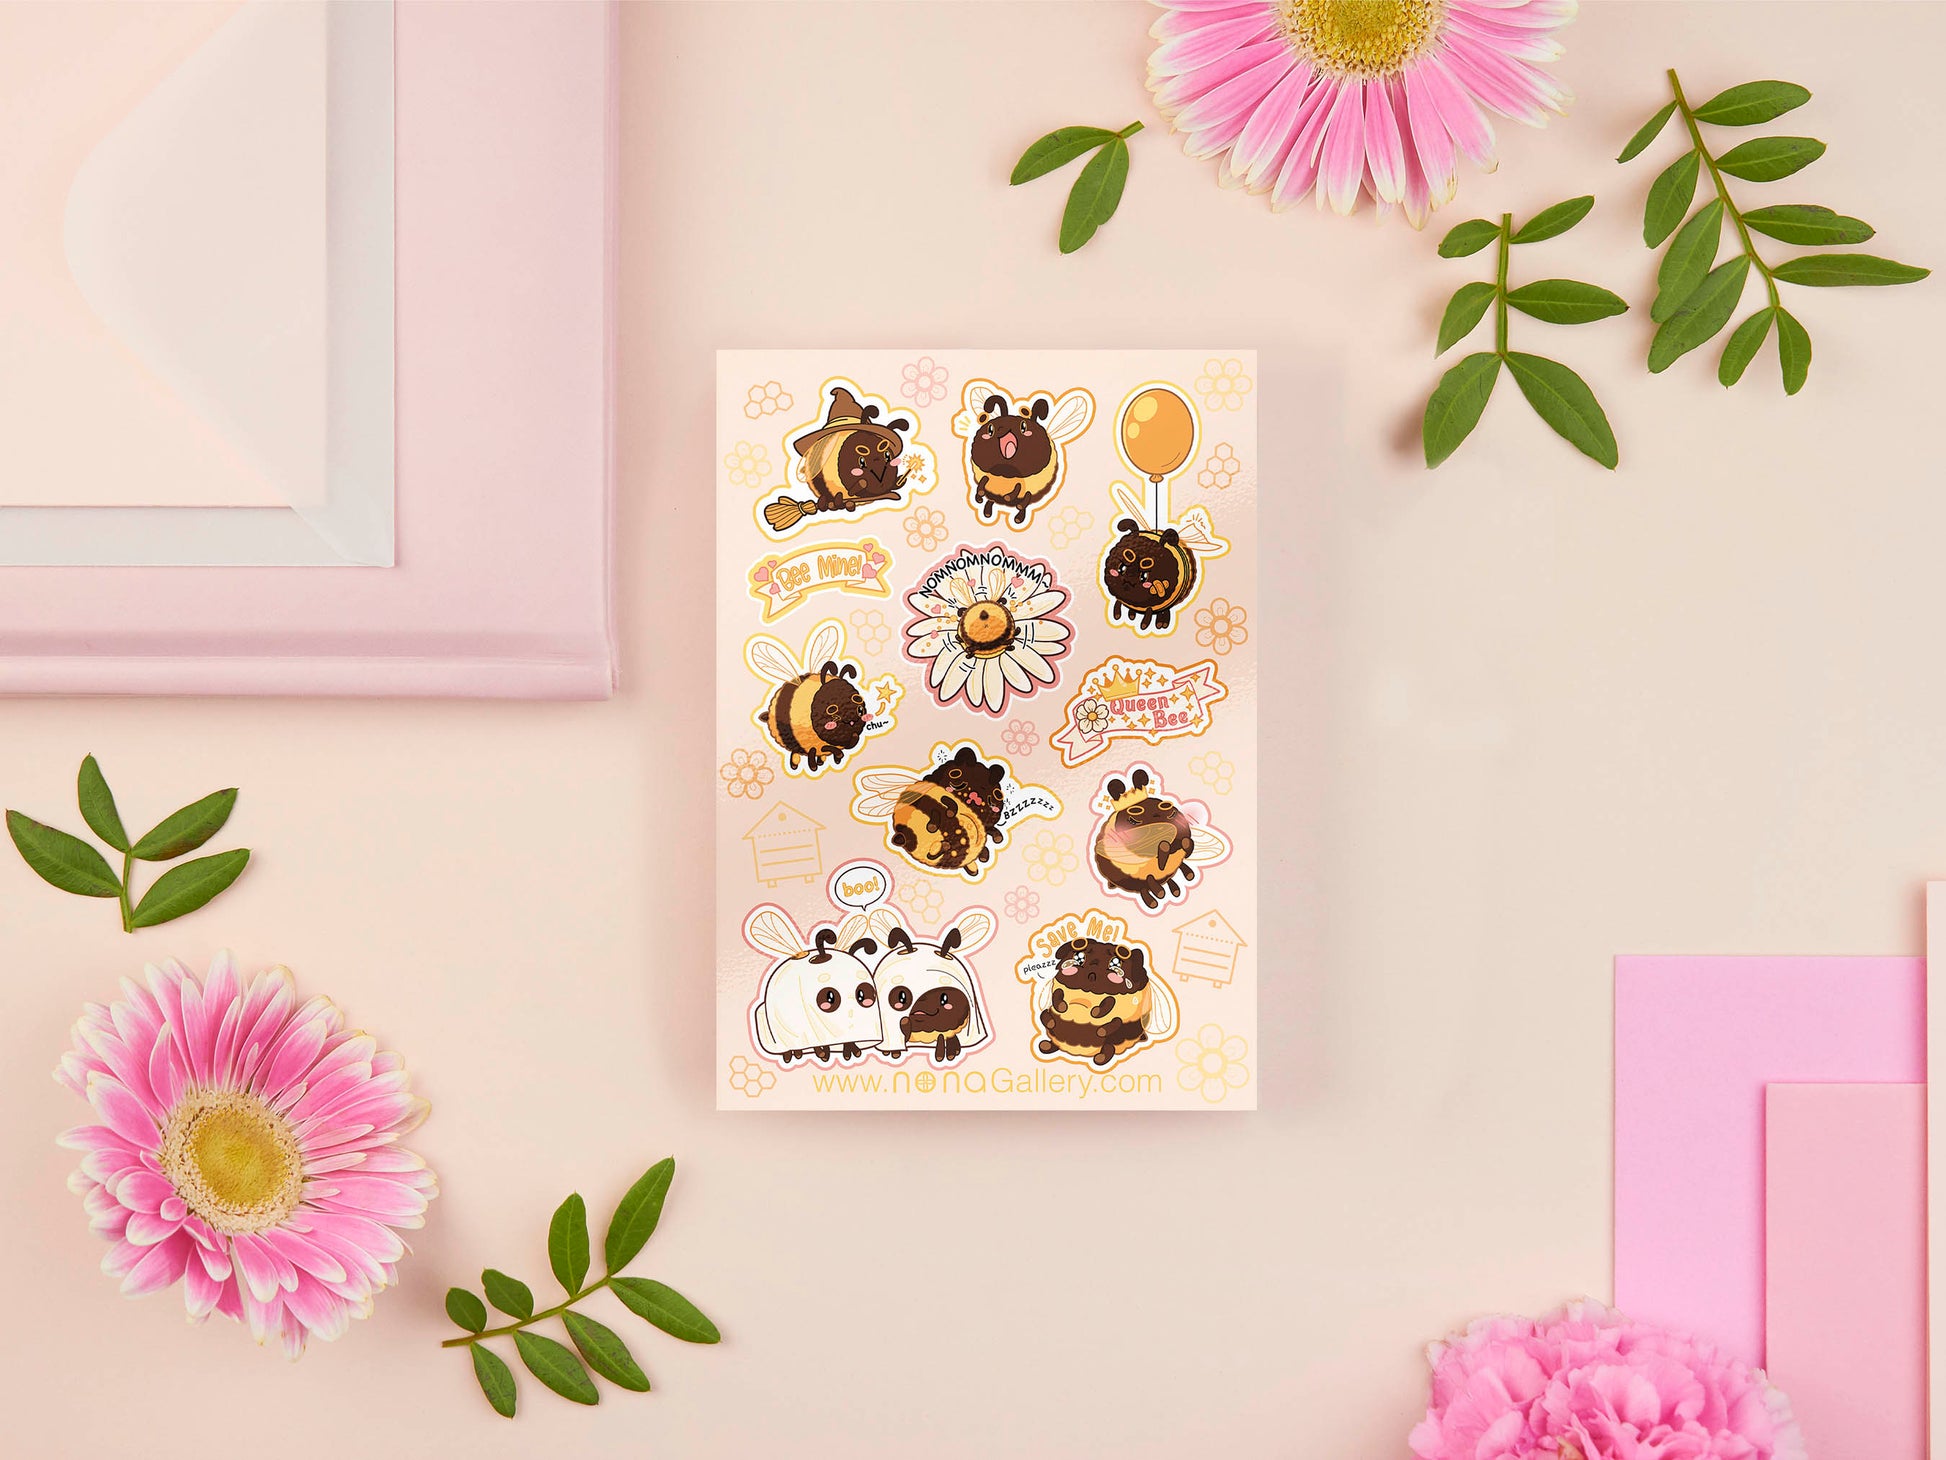 Large sticker sheet of digital illustrated cartoon bees in various poses and expressions 